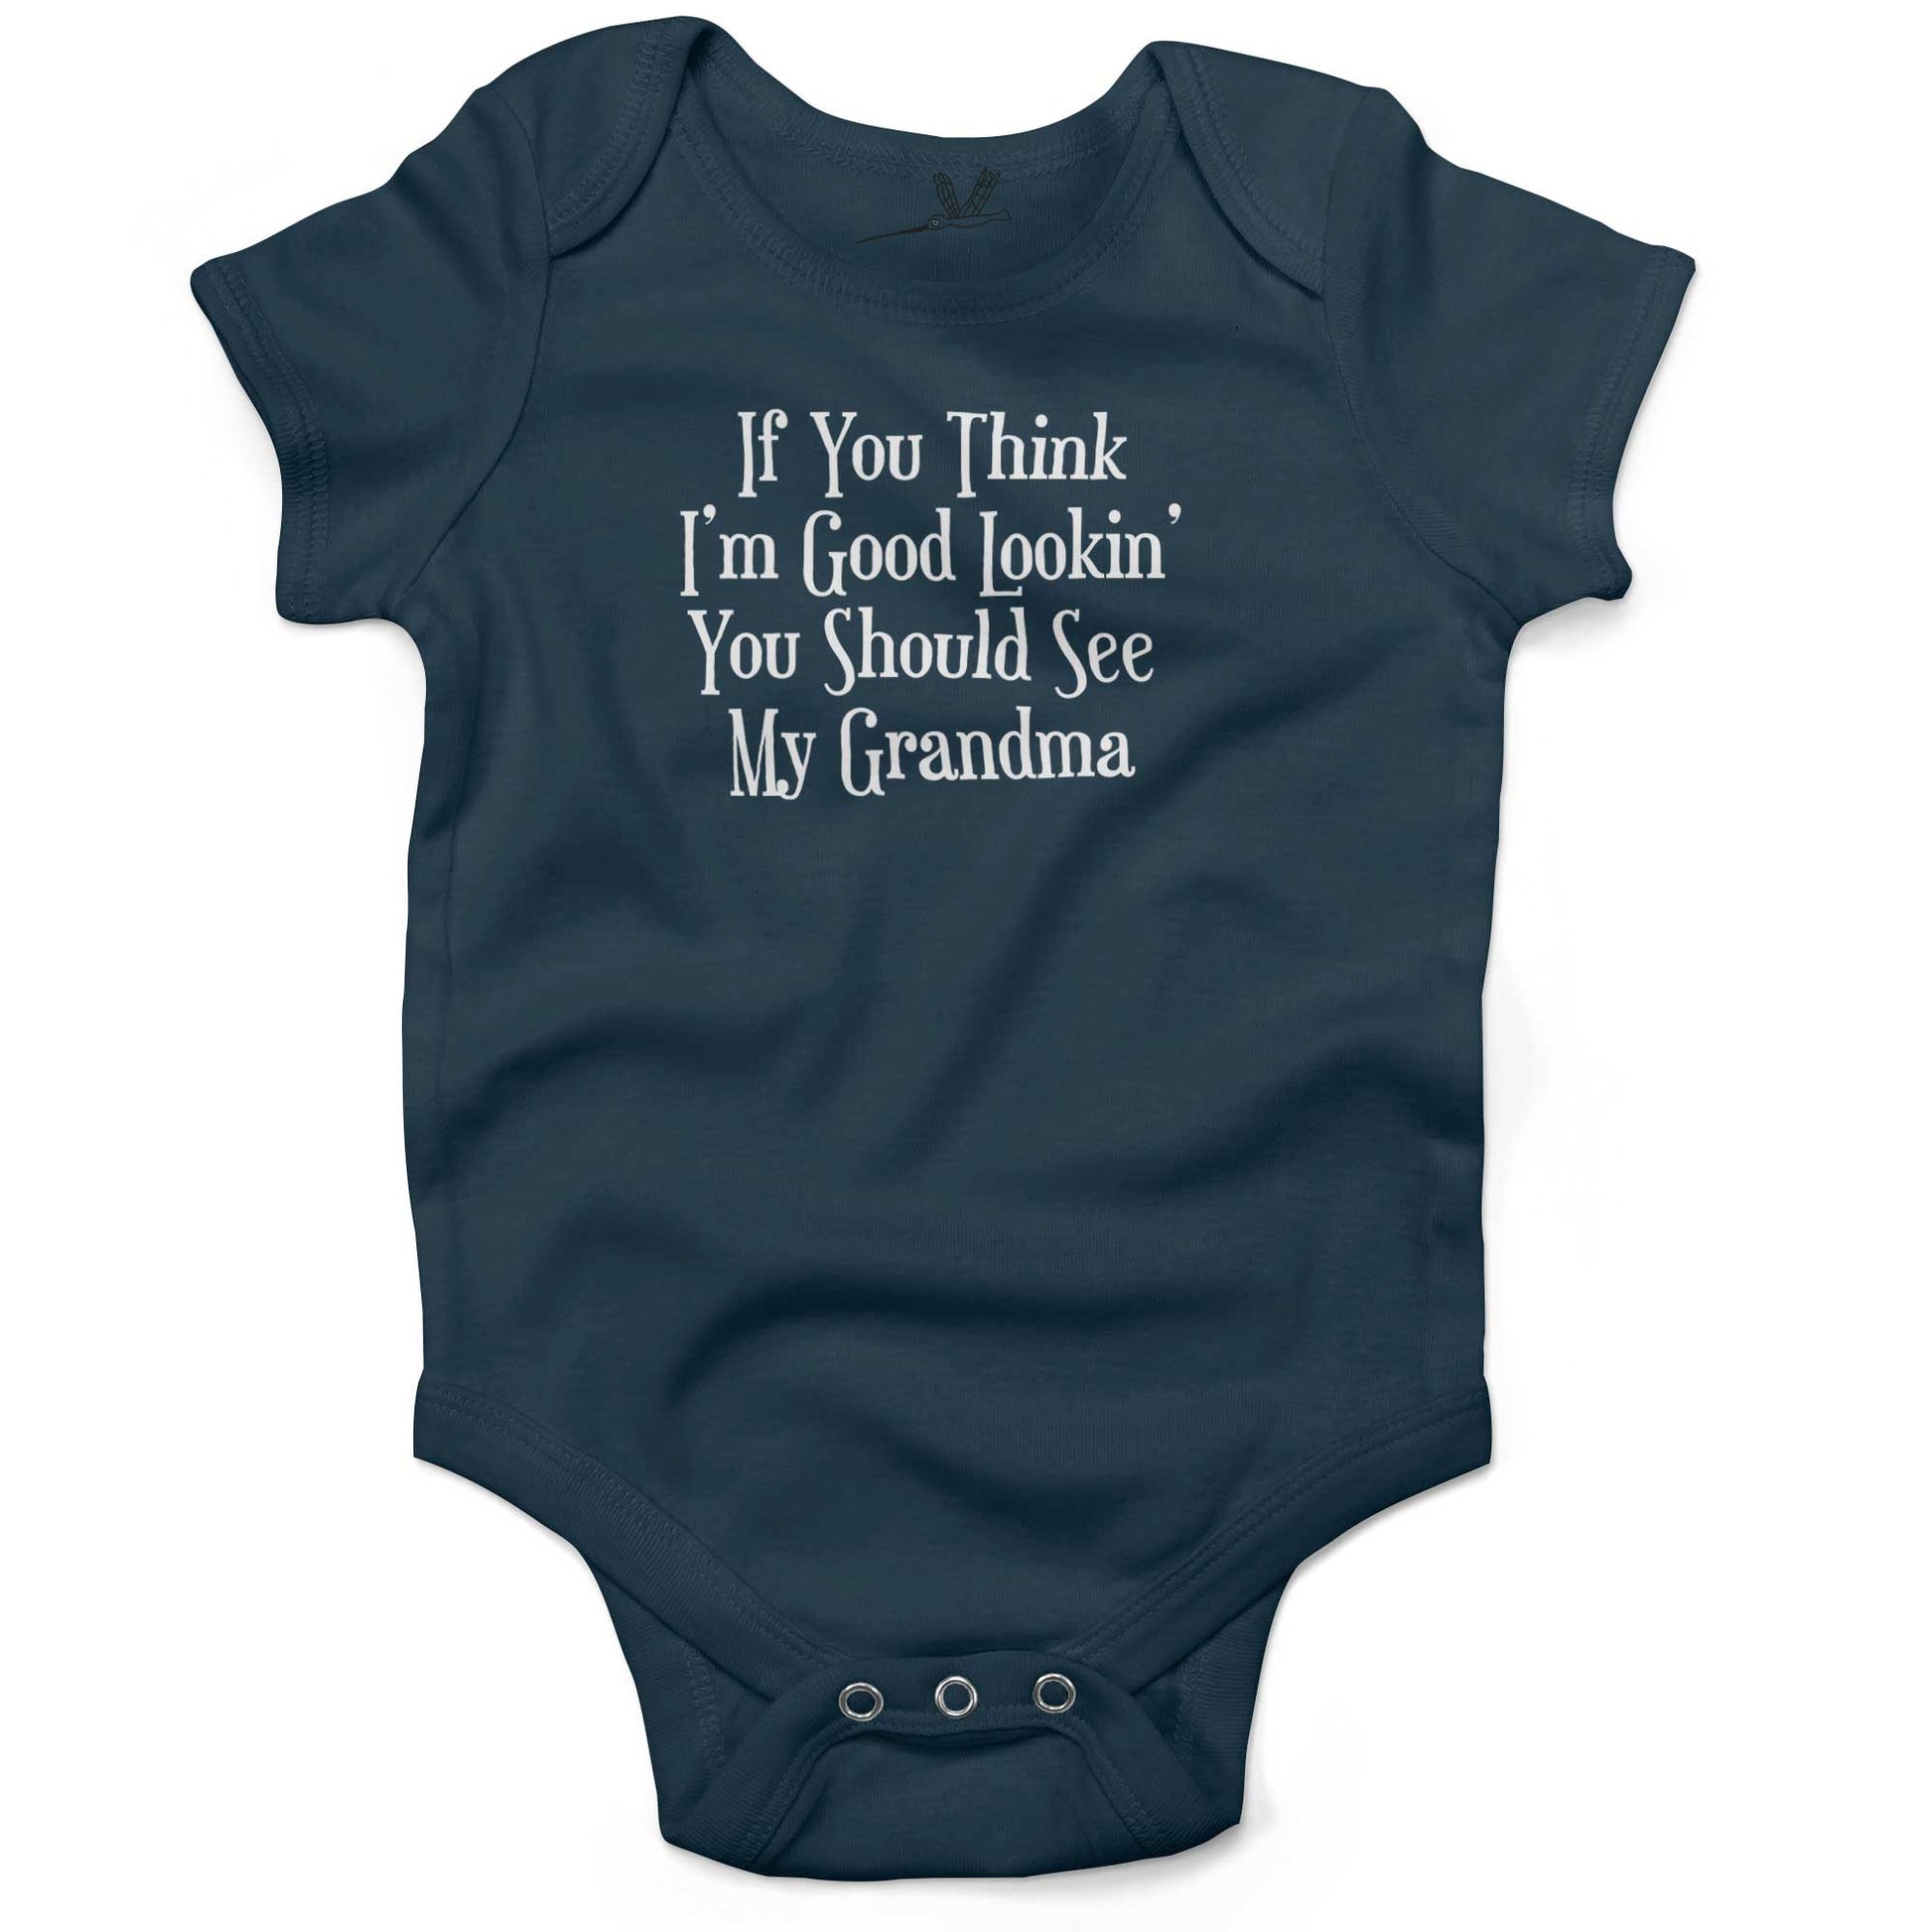 If You Think I'm Good Lookin', You Should See My Grandma Infant Bodysuit or Raglan Tee-Organic Pacific Blue-3-6 months